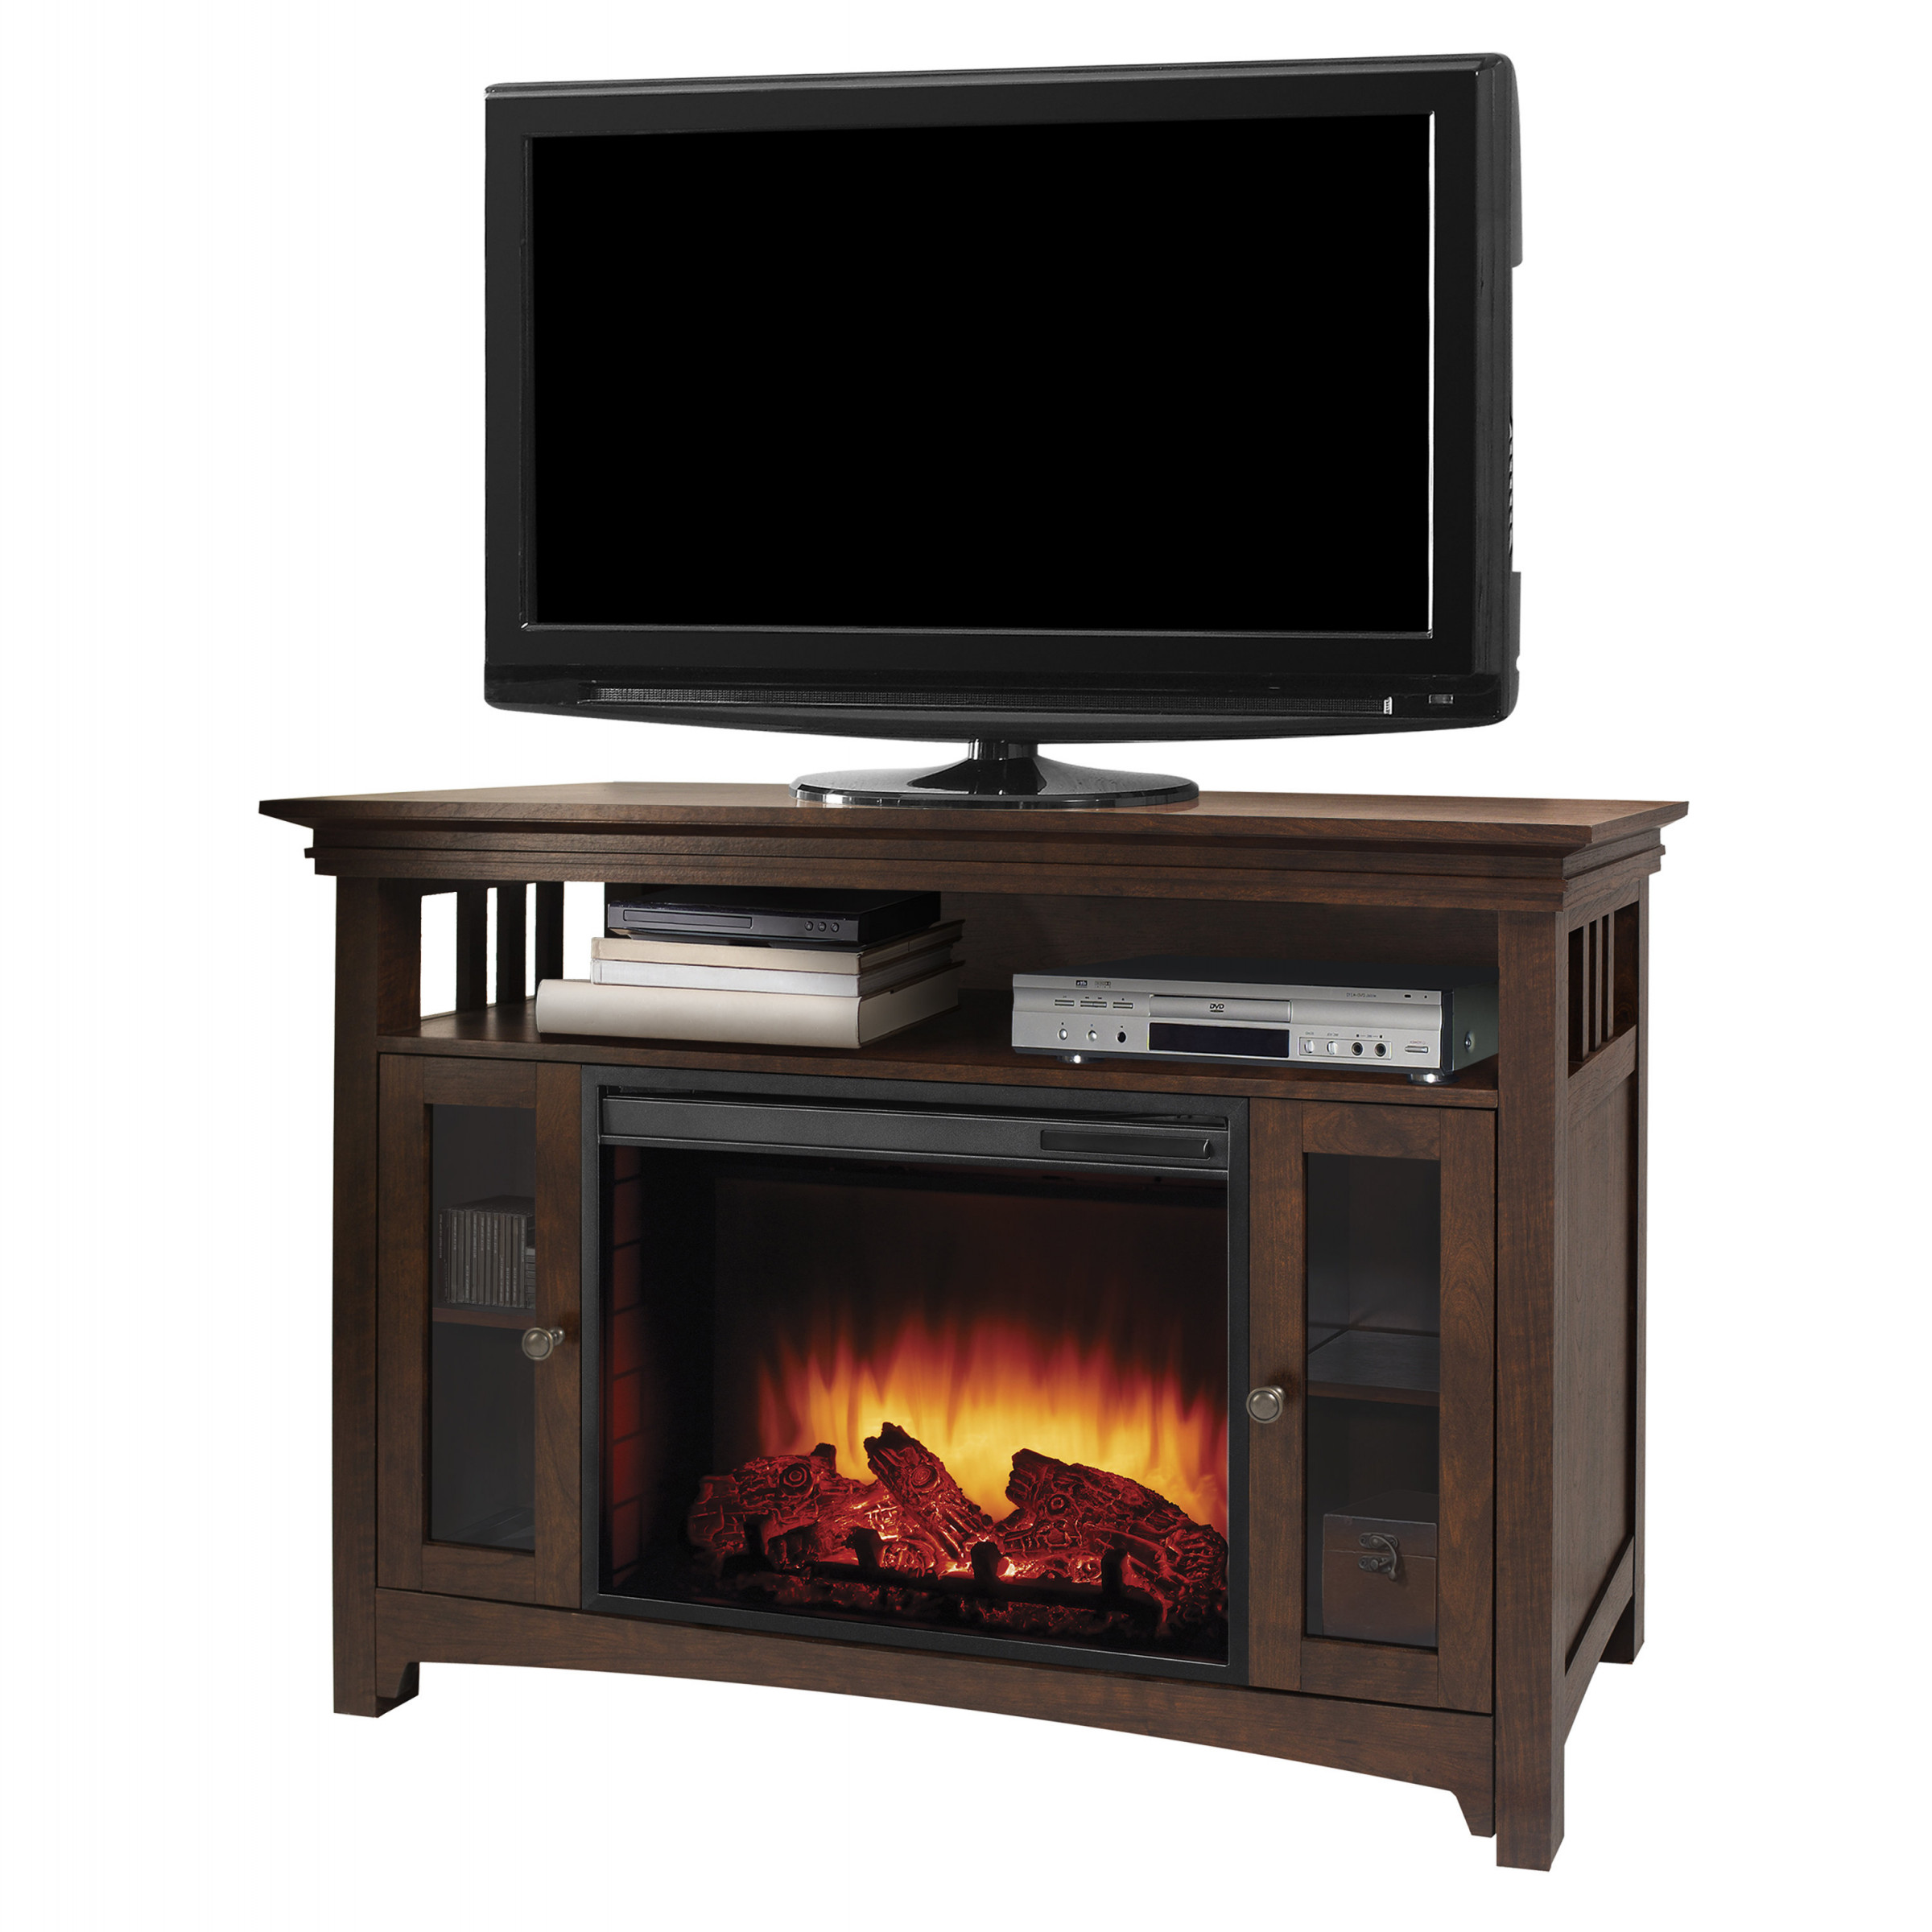 Tv Stand W Fireplace Best Of 35 Minimaliste Electric Fireplace Tv Stand